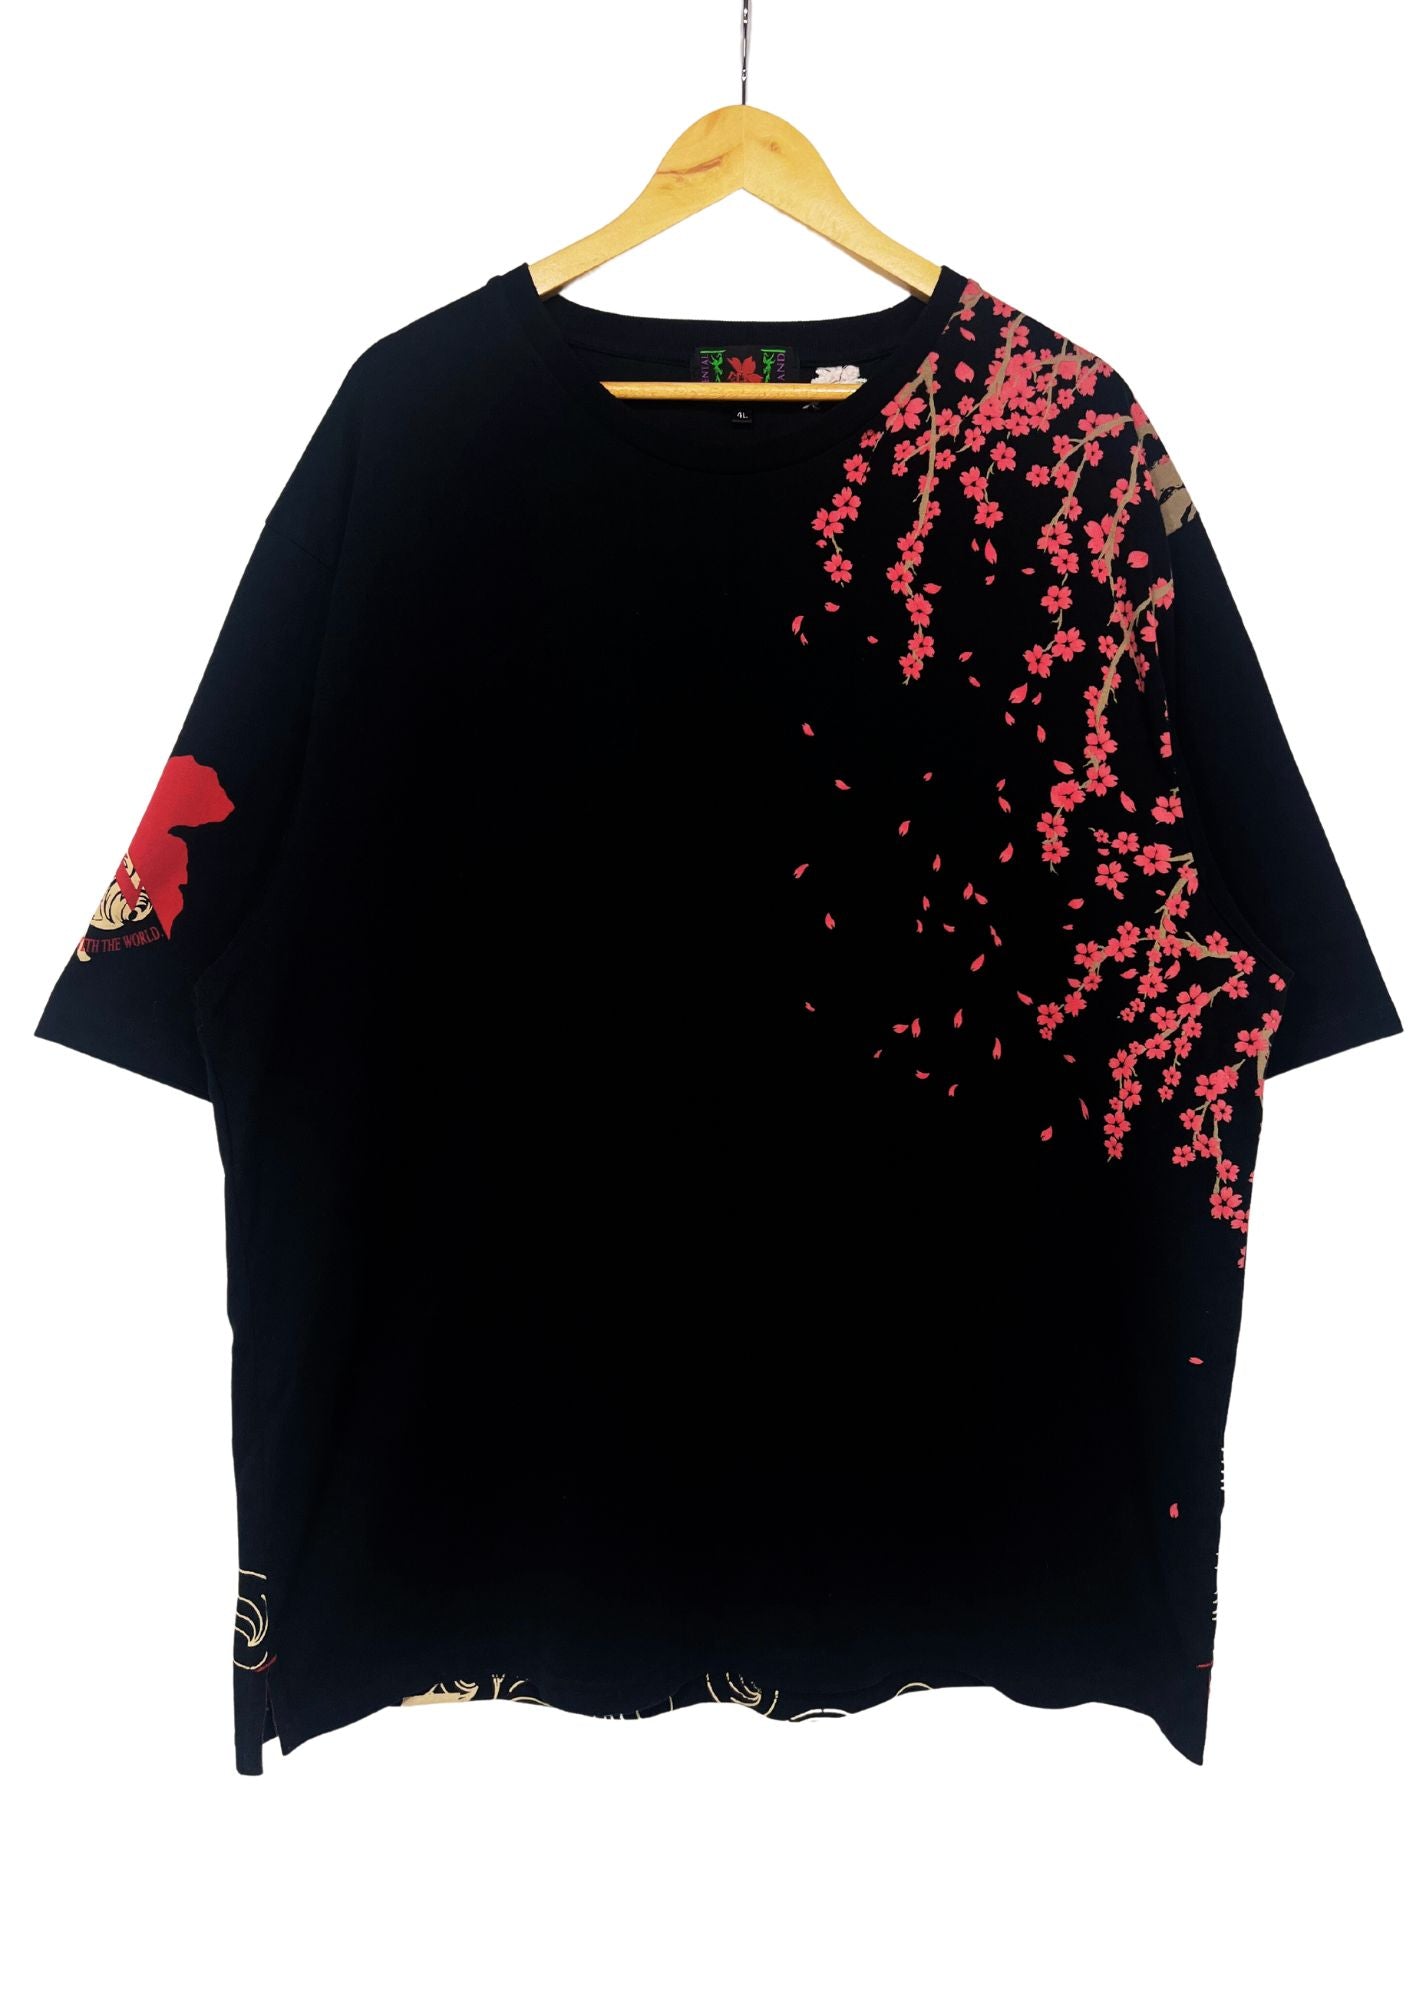 2010s Evangelion x Nishiki Embroidered Rei Ayanami Cherry Blossom Embroidered T-shirt